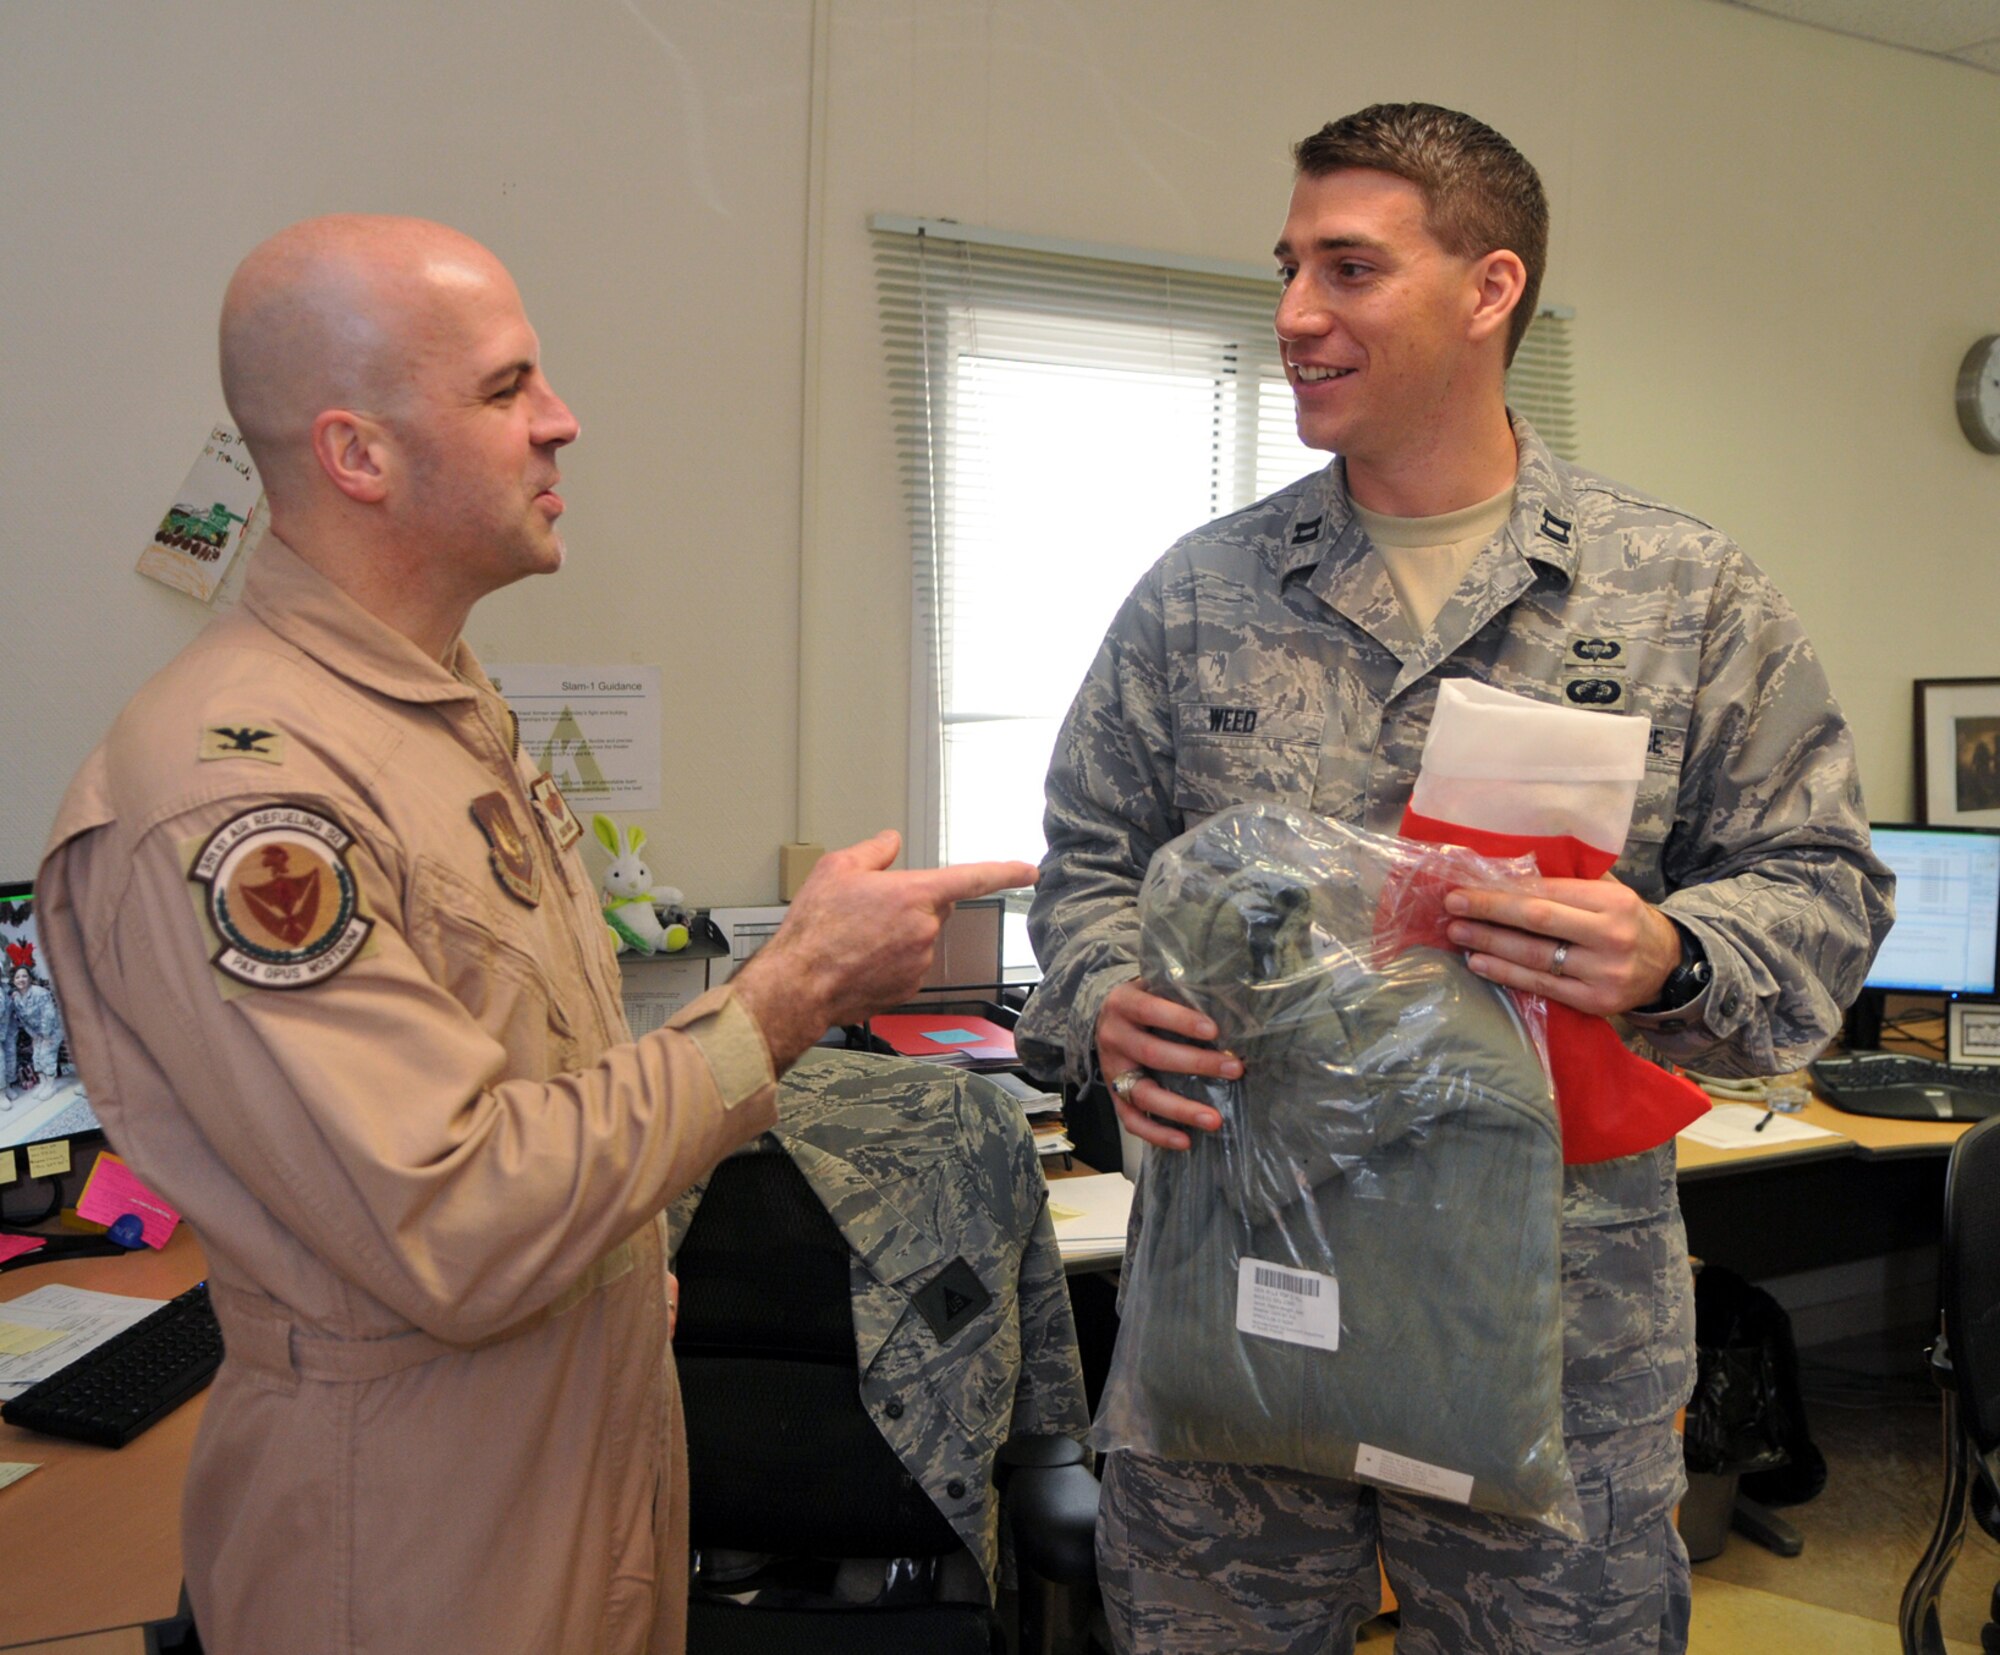 SOUTHWEST ASIA -- Col. Chad Manske, 100th Air Refueling Wing commander, delivers holiday gifts to Capt. Joshuah Weed, deployed from the 100th Air Refueling Wing, during a visit Dec. 18.  Colonel Manske travelled with Chaplain (Lt. Col.) Frederick Viccellio to the Middle East to hand deliver treats and encouragement during the holidays.  (U.S. Air Force photo by Staff Sgt. Austin M. May)